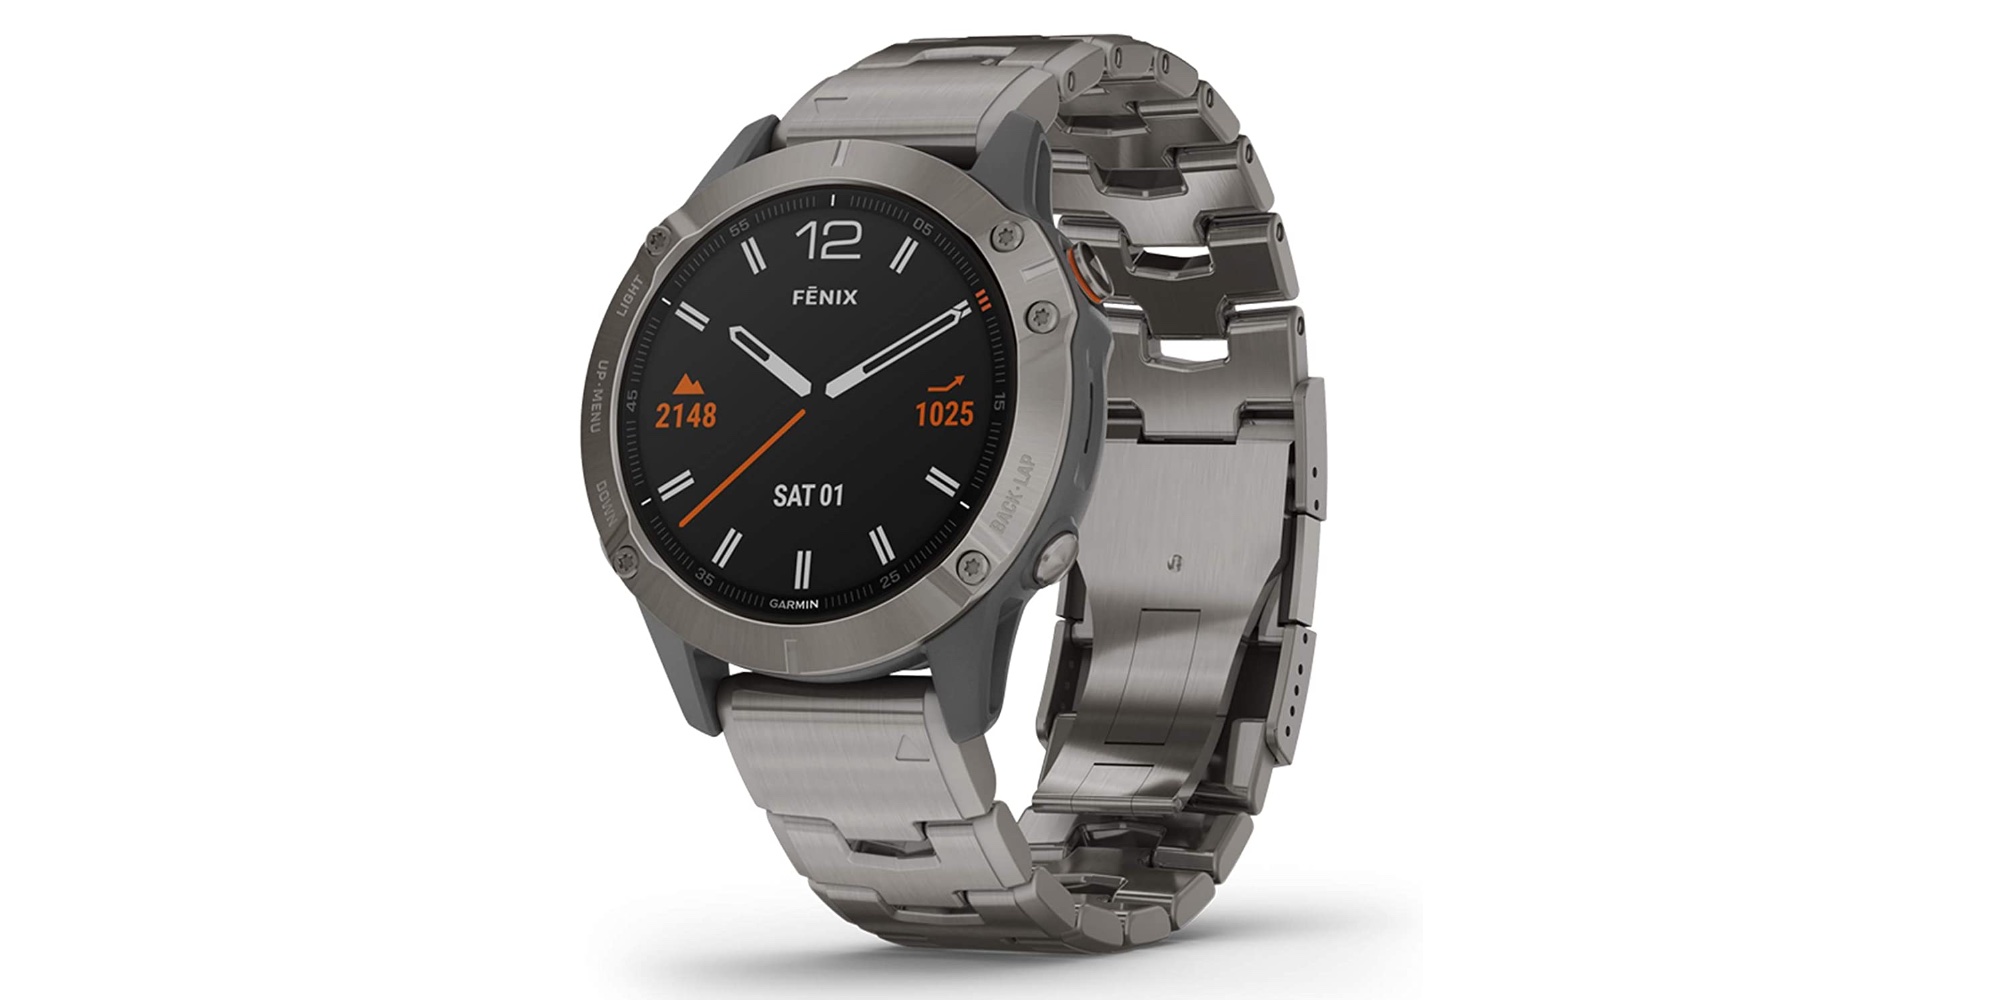 Forbyde Aktiver Hverdage Save $150 on Garmin's Fenix 6 Sapphire Smartwatch at a new low, more from  $75